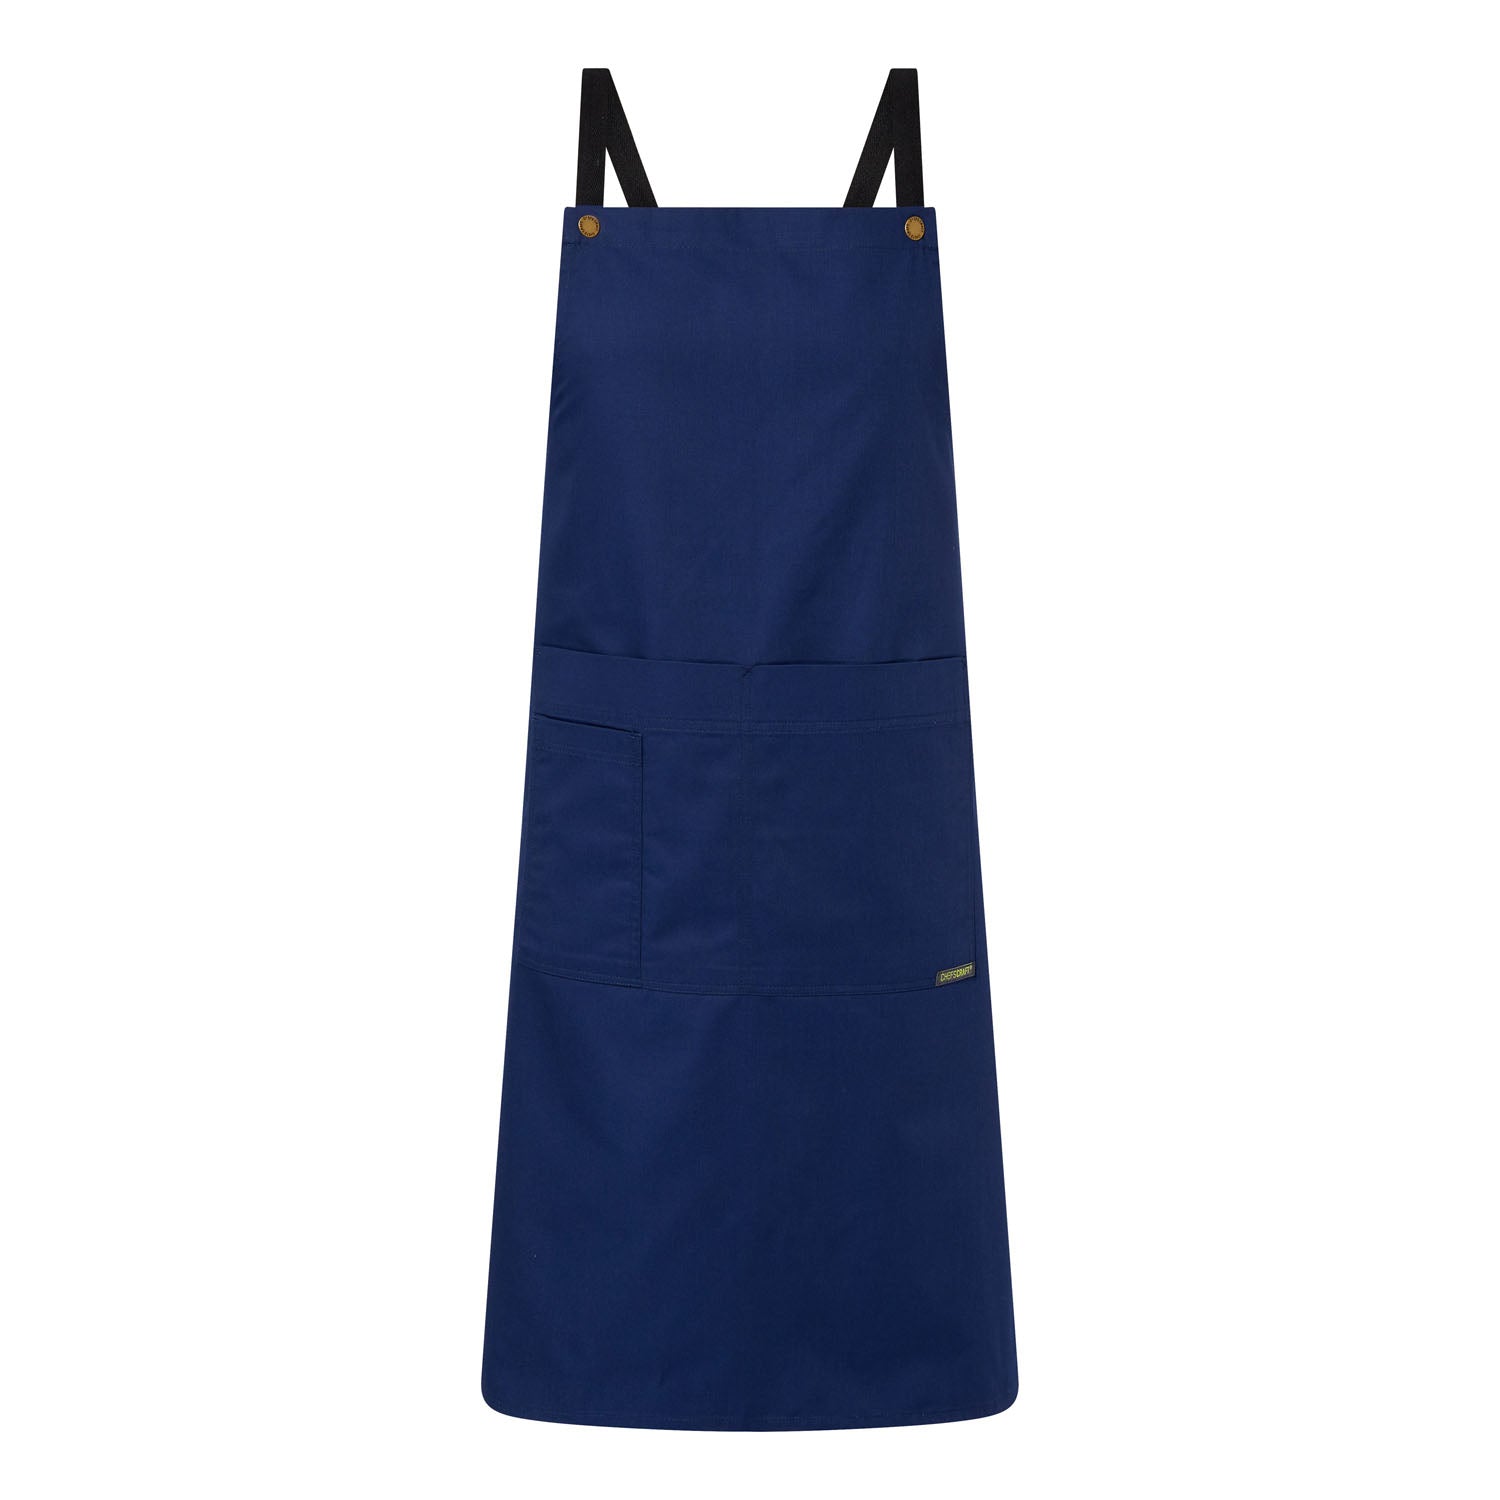 Bistro Fullb Cross Back Apron - made by ChefsCraft